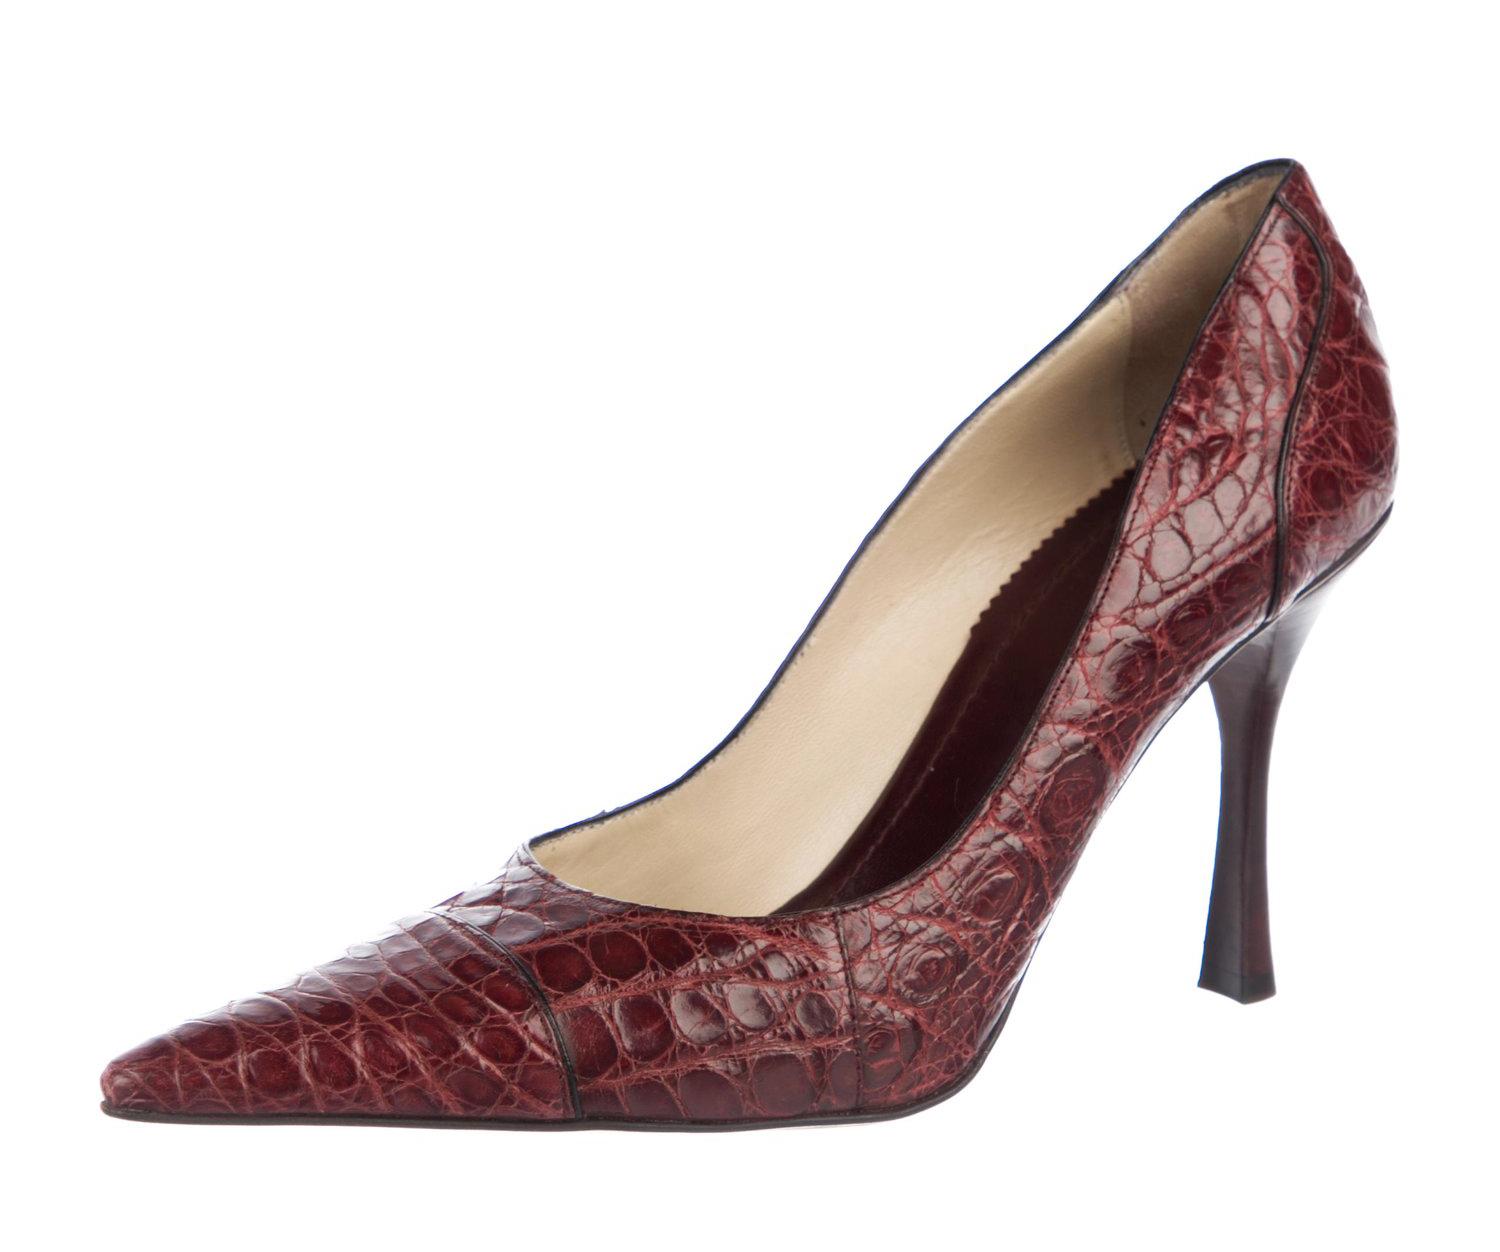 Tom Ford for Gucci Alligator Shoes Pumps
F/W 2002 Collection
Designer size 39.5 C
Wine color alligator Gucci pointed-toe pumps with tonal cap-toes and stacked heels, Leather sole with non-slip rubber finish.
Hell height - 4 inches
Made in Italy
New